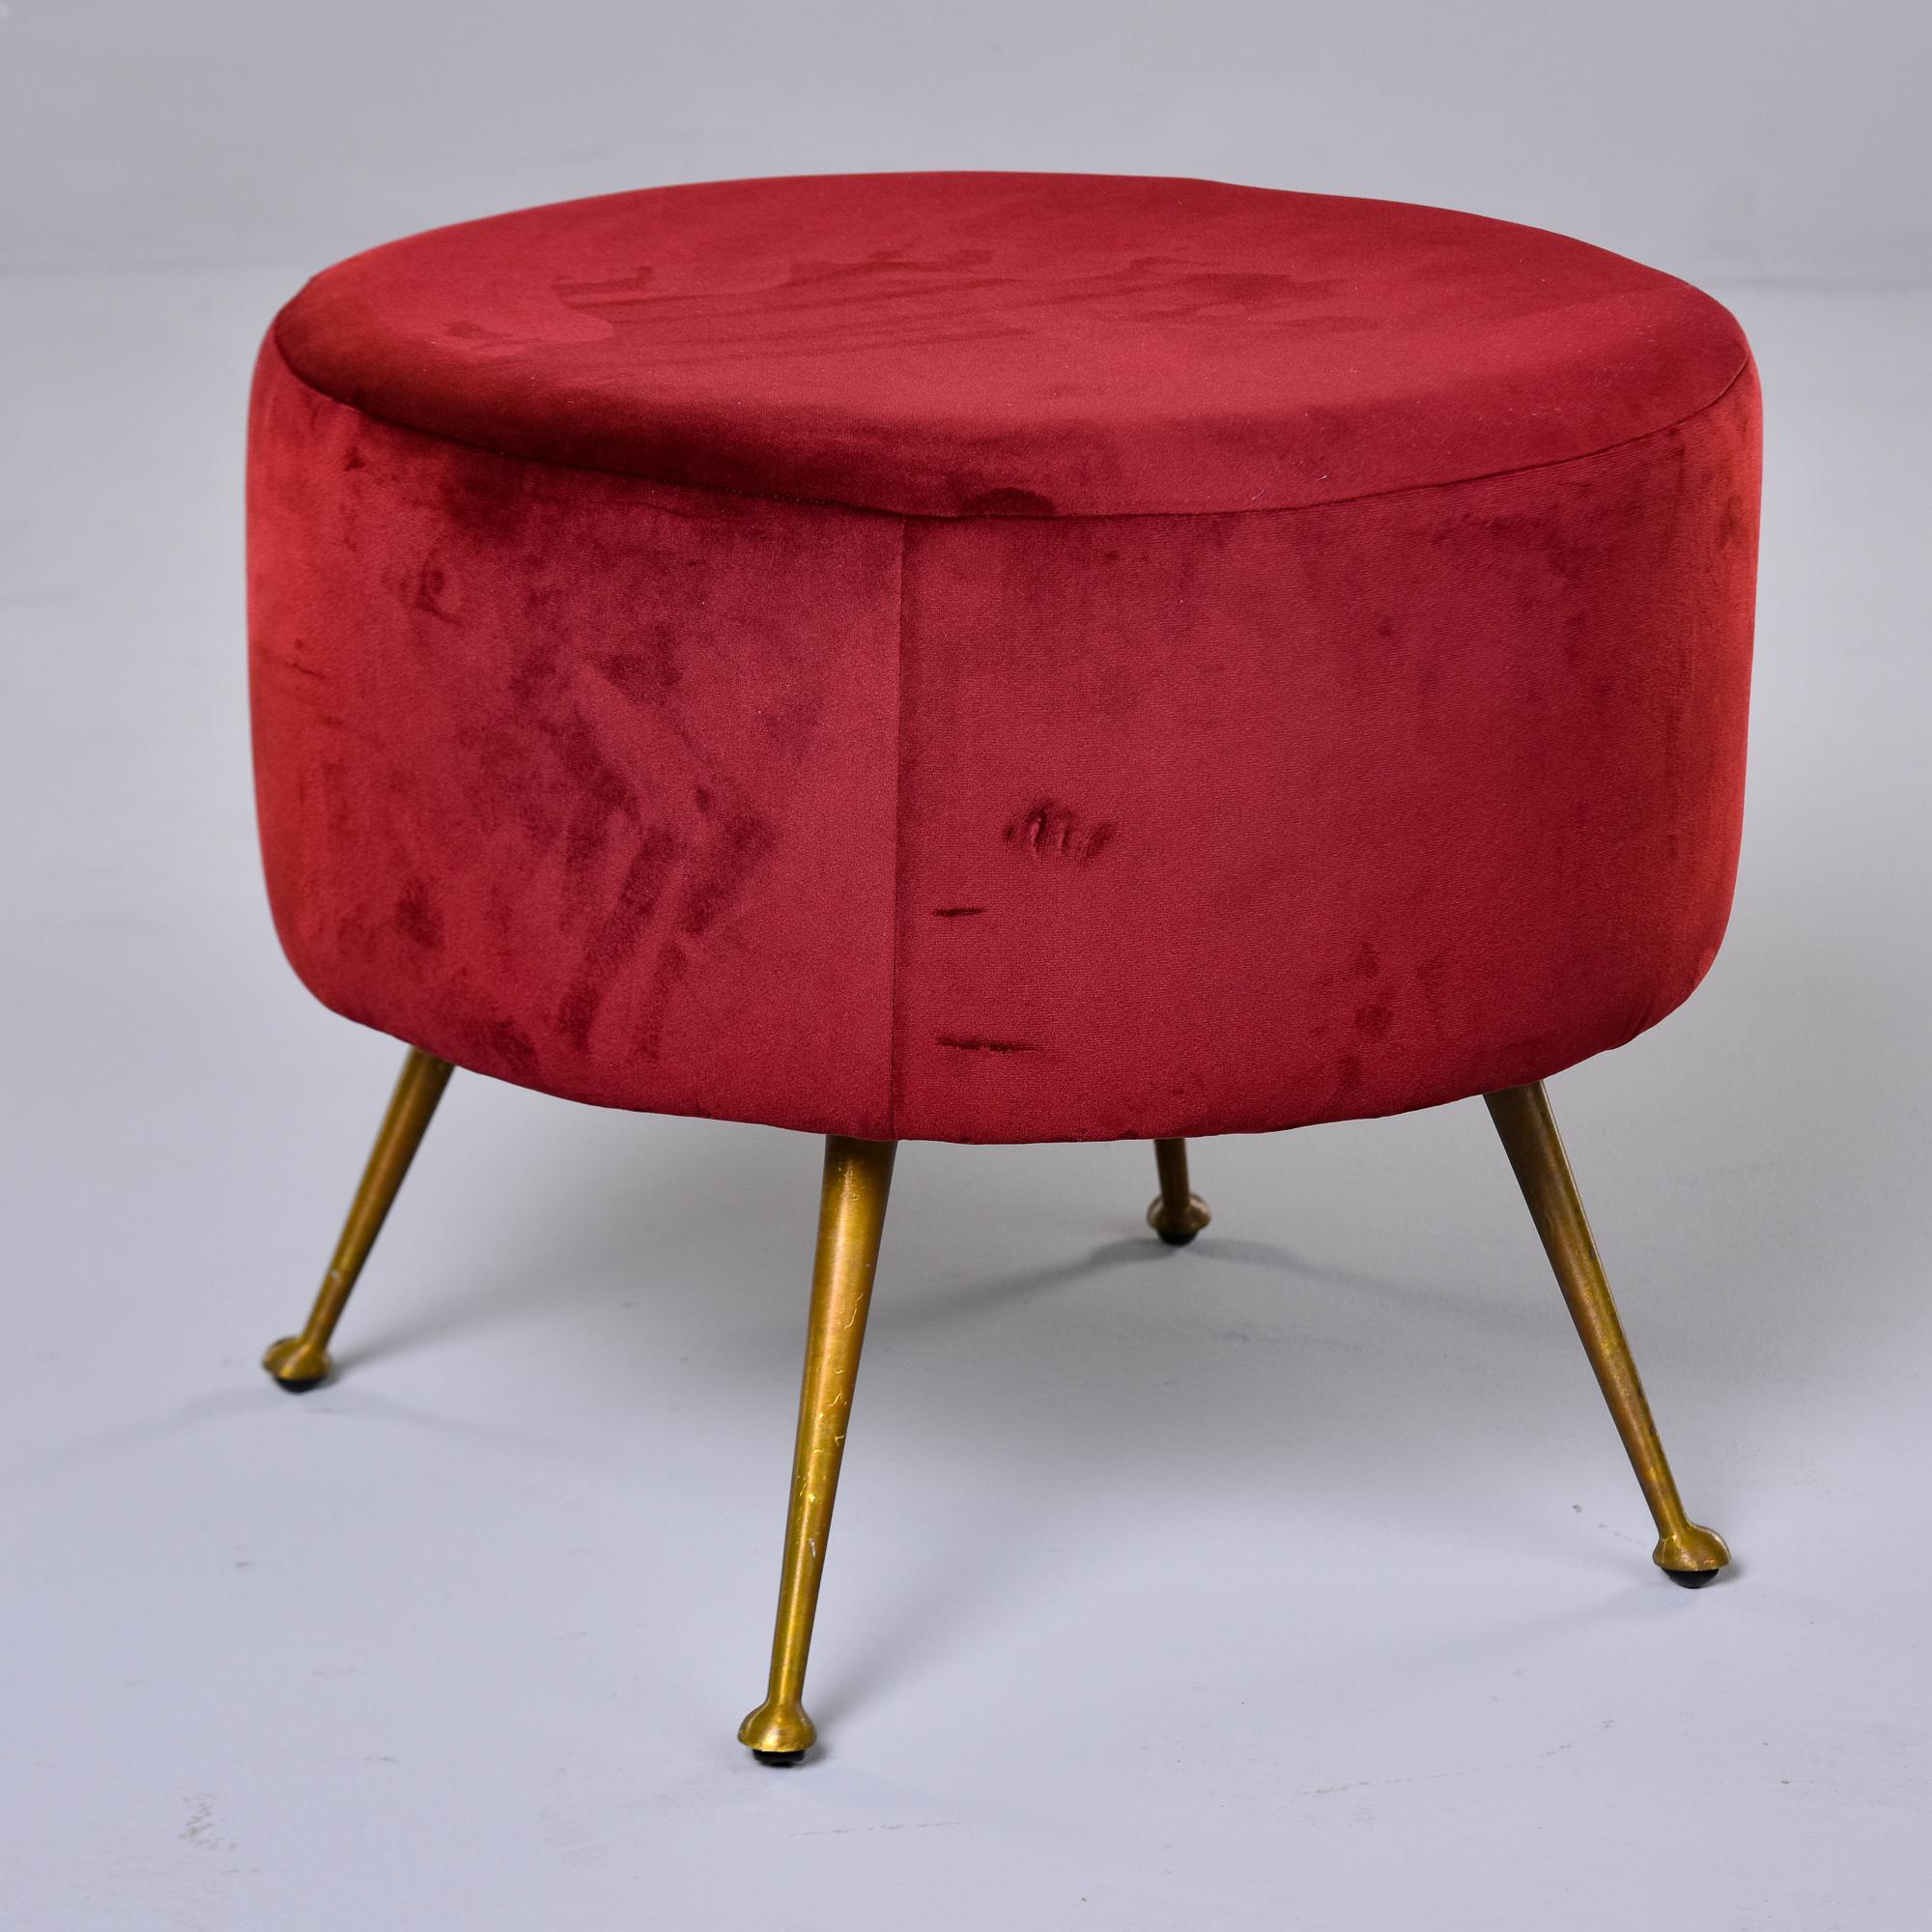 20th Century Italian Midcentury Round Stool with Red Upholstery and Brass Legs For Sale